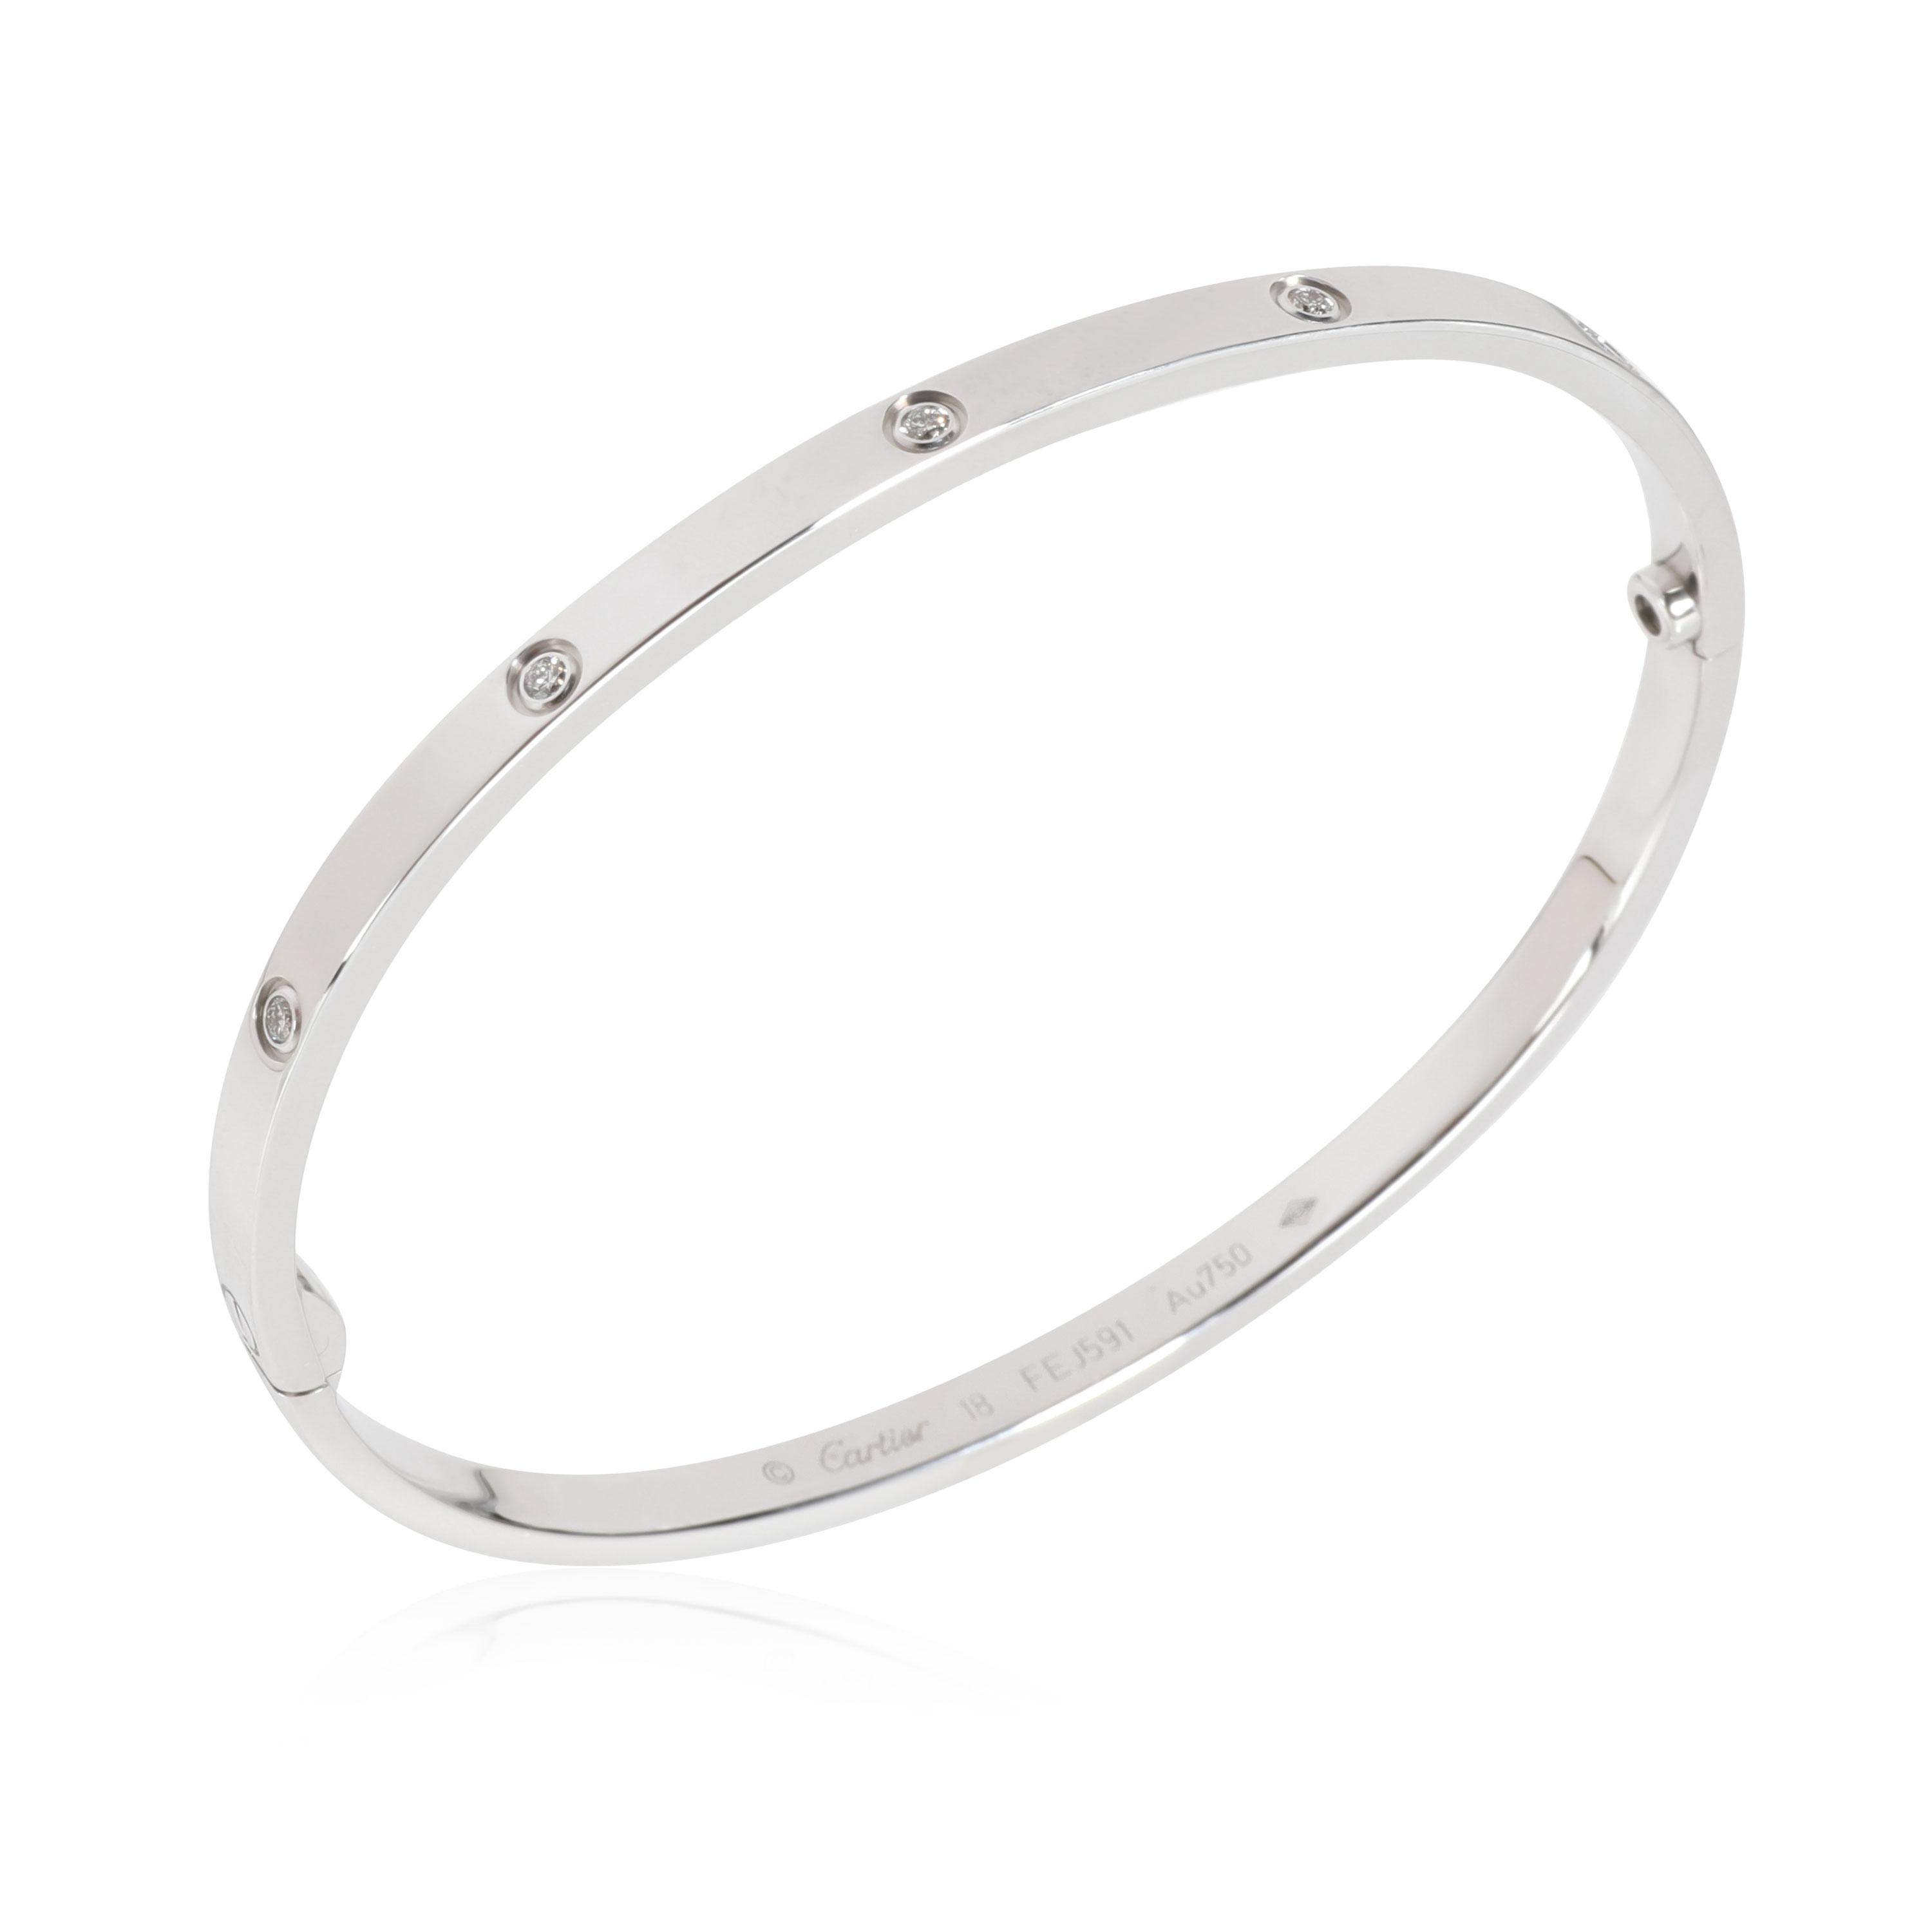 Cartier Love Diamond Bracelet in 18K White Gold 0.21 CTW

PRIMARY DETAILS
SKU: 111532
Listing Title: Cartier Love Diamond Bracelet in 18K White Gold 0.21 CTW
Condition Description: Retails for 9550 USD. In excellent condition and recently polished.